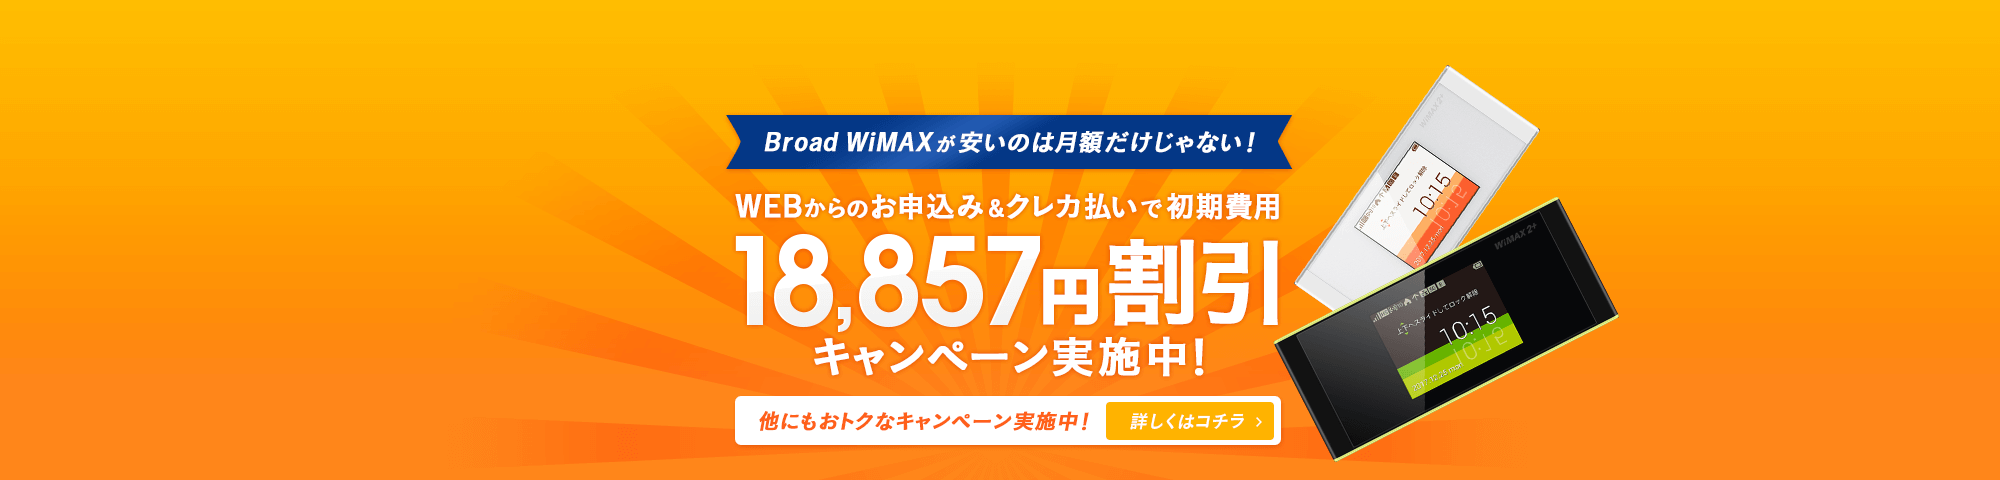 Broad WiMAX 2000×480_2のバナーデザイン